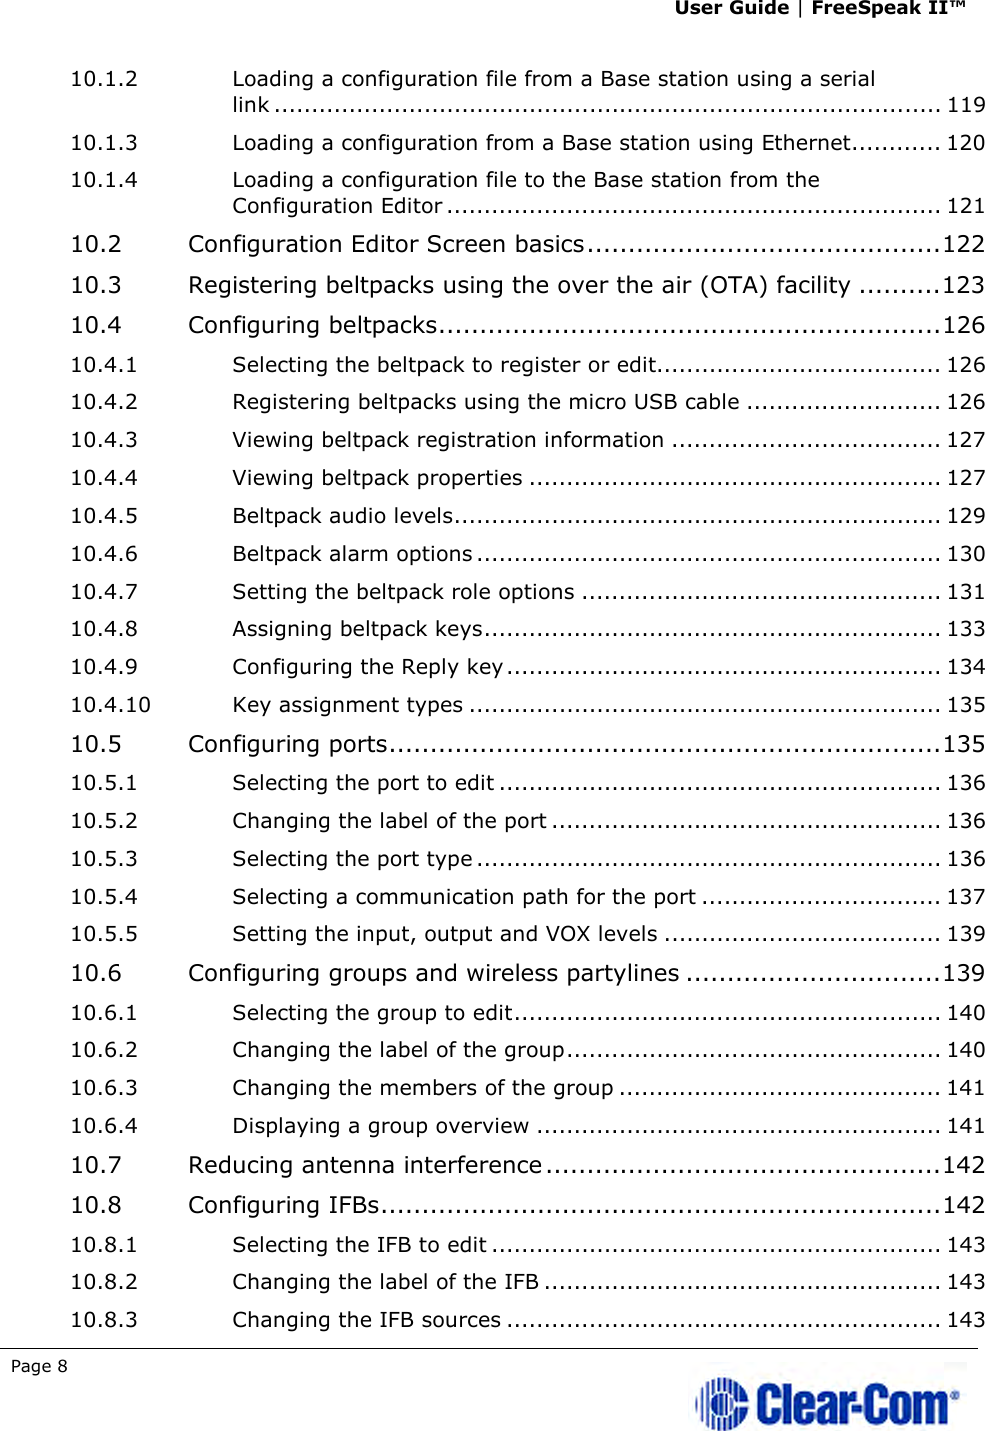 User Guide | FreeSpeak II™  Page 8   10.1.2 Loading a configuration file from a Base station using a serial link ......................................................................................... 119 10.1.3 Loading a configuration from a Base station using Ethernet............ 120 10.1.4 Loading a configuration file to the Base station from the Configuration Editor .................................................................. 121 10.2 Configuration Editor Screen basics ........................................... 122 10.3 Registering beltpacks using the over the air (OTA) facility .......... 123 10.4 Configuring beltpacks ............................................................. 126 10.4.1 Selecting the beltpack to register or edit...................................... 126 10.4.2 Registering beltpacks using the micro USB cable .......................... 126 10.4.3 Viewing beltpack registration information .................................... 127 10.4.4 Viewing beltpack properties ....................................................... 127 10.4.5 Beltpack audio levels ................................................................. 129 10.4.6 Beltpack alarm options .............................................................. 130 10.4.7 Setting the beltpack role options ................................................ 131 10.4.8 Assigning beltpack keys ............................................................. 133 10.4.9 Configuring the Reply key .......................................................... 134 10.4.10 Key assignment types ............................................................... 135 10.5 Configuring ports ................................................................... 135 10.5.1 Selecting the port to edit ........................................................... 136 10.5.2 Changing the label of the port .................................................... 136 10.5.3 Selecting the port type .............................................................. 136 10.5.4 Selecting a communication path for the port ................................ 137 10.5.5 Setting the input, output and VOX levels ..................................... 139 10.6 Configuring groups and wireless partylines ............................... 139 10.6.1 Selecting the group to edit ......................................................... 140 10.6.2 Changing the label of the group .................................................. 140 10.6.3 Changing the members of the group ........................................... 141 10.6.4 Displaying a group overview ...................................................... 141 10.7 Reducing antenna interference ................................................ 142 10.8 Configuring IFBs .................................................................... 142 10.8.1 Selecting the IFB to edit ............................................................ 143 10.8.2 Changing the label of the IFB ..................................................... 143 10.8.3 Changing the IFB sources .......................................................... 143 